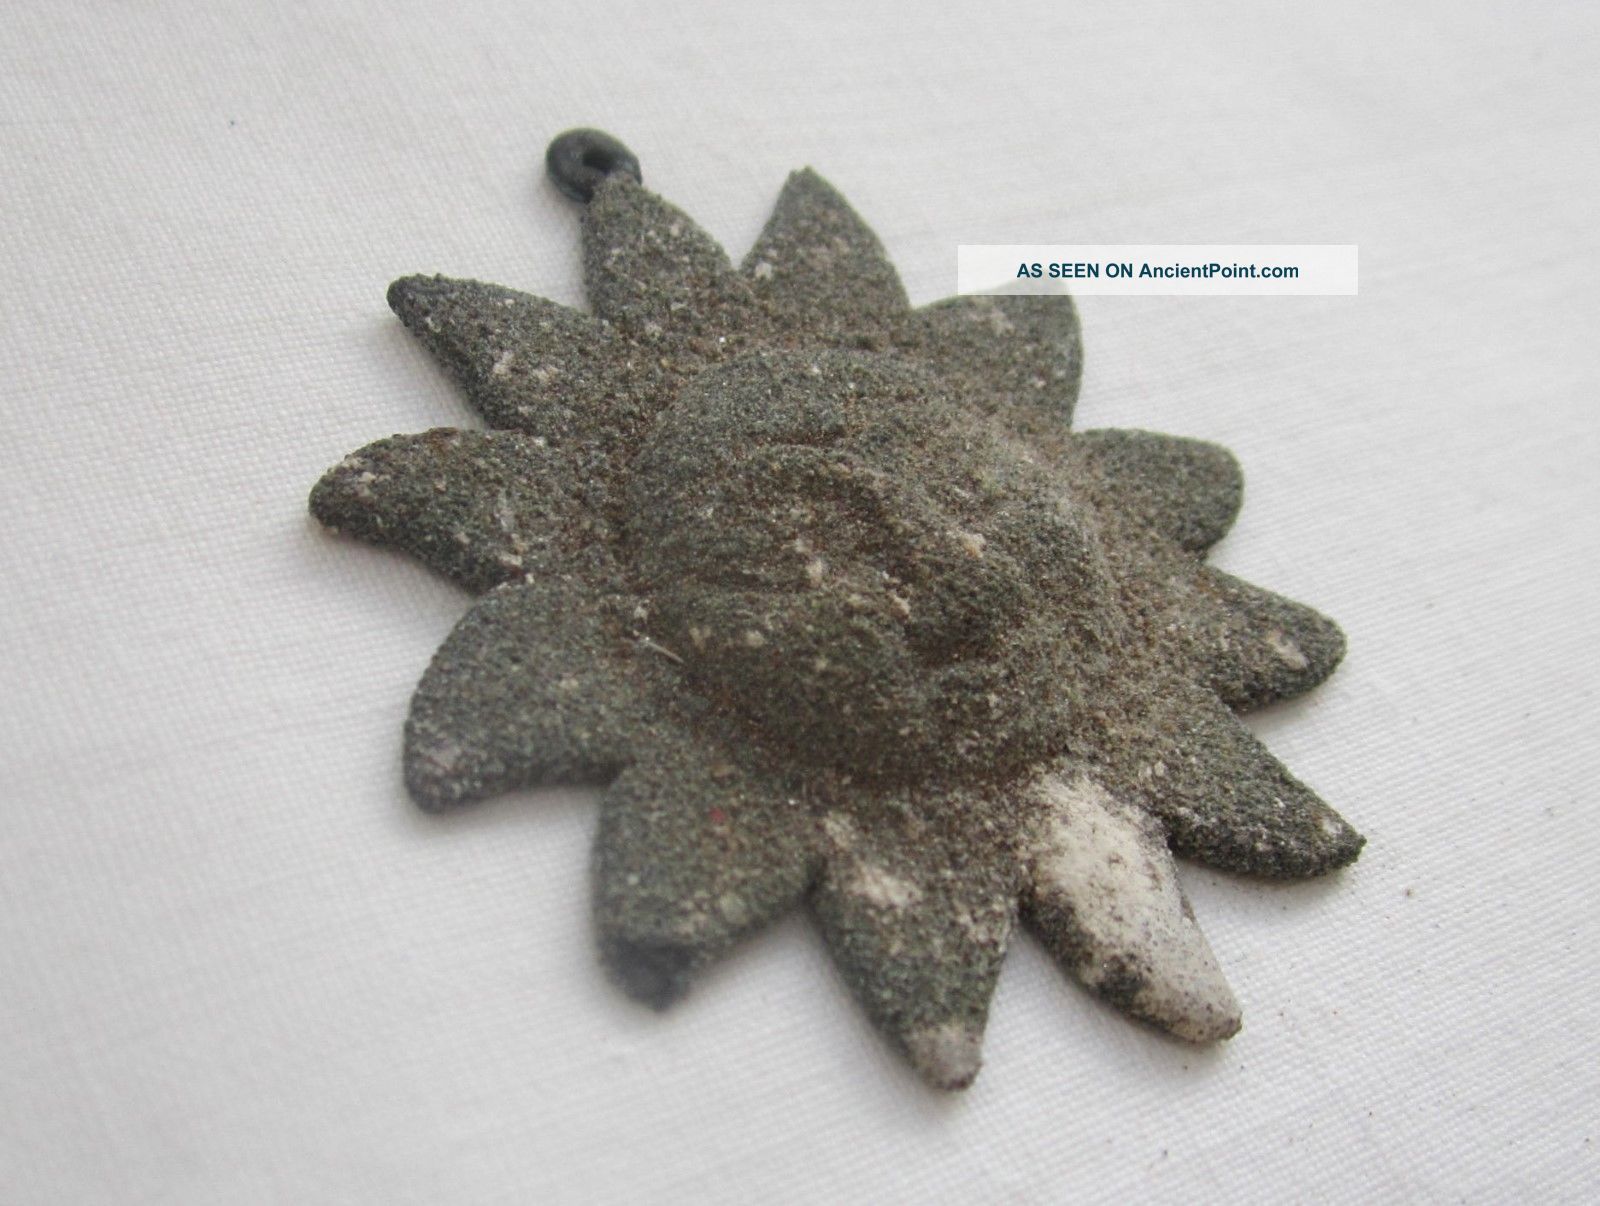 Old Sterling Silver Pendant Found Metal Detecting In The Mediterranean Sea. European photo